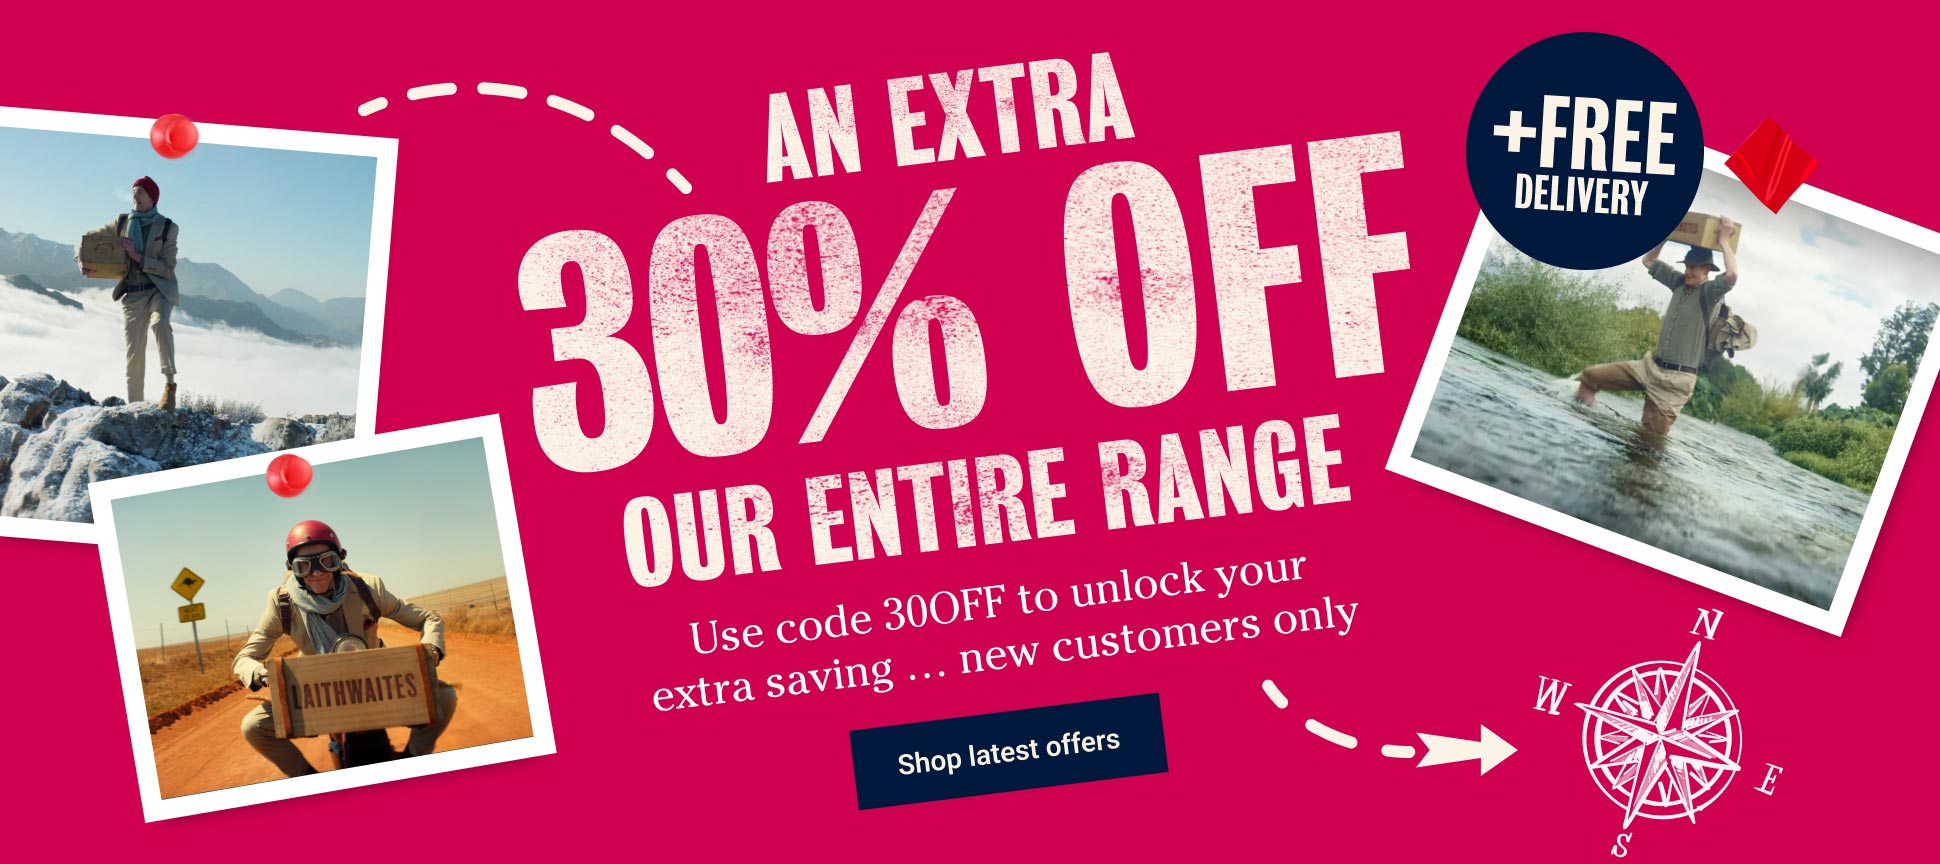 An extra 30% off our entire range - LW